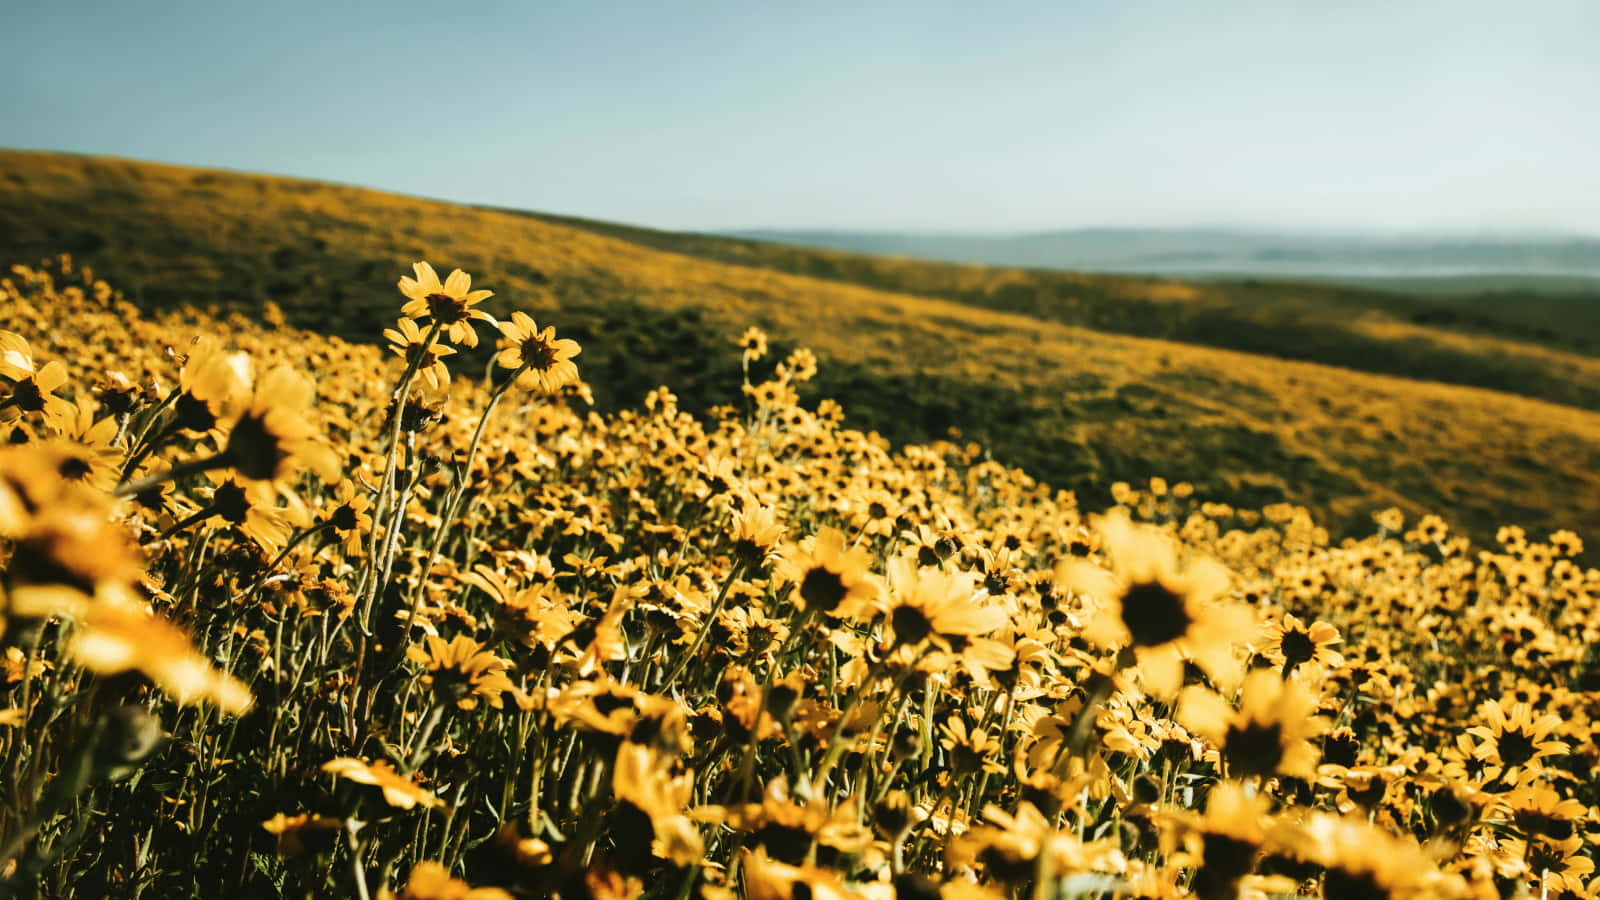 A Field Of Sunflowers In The Middle Of A Hill